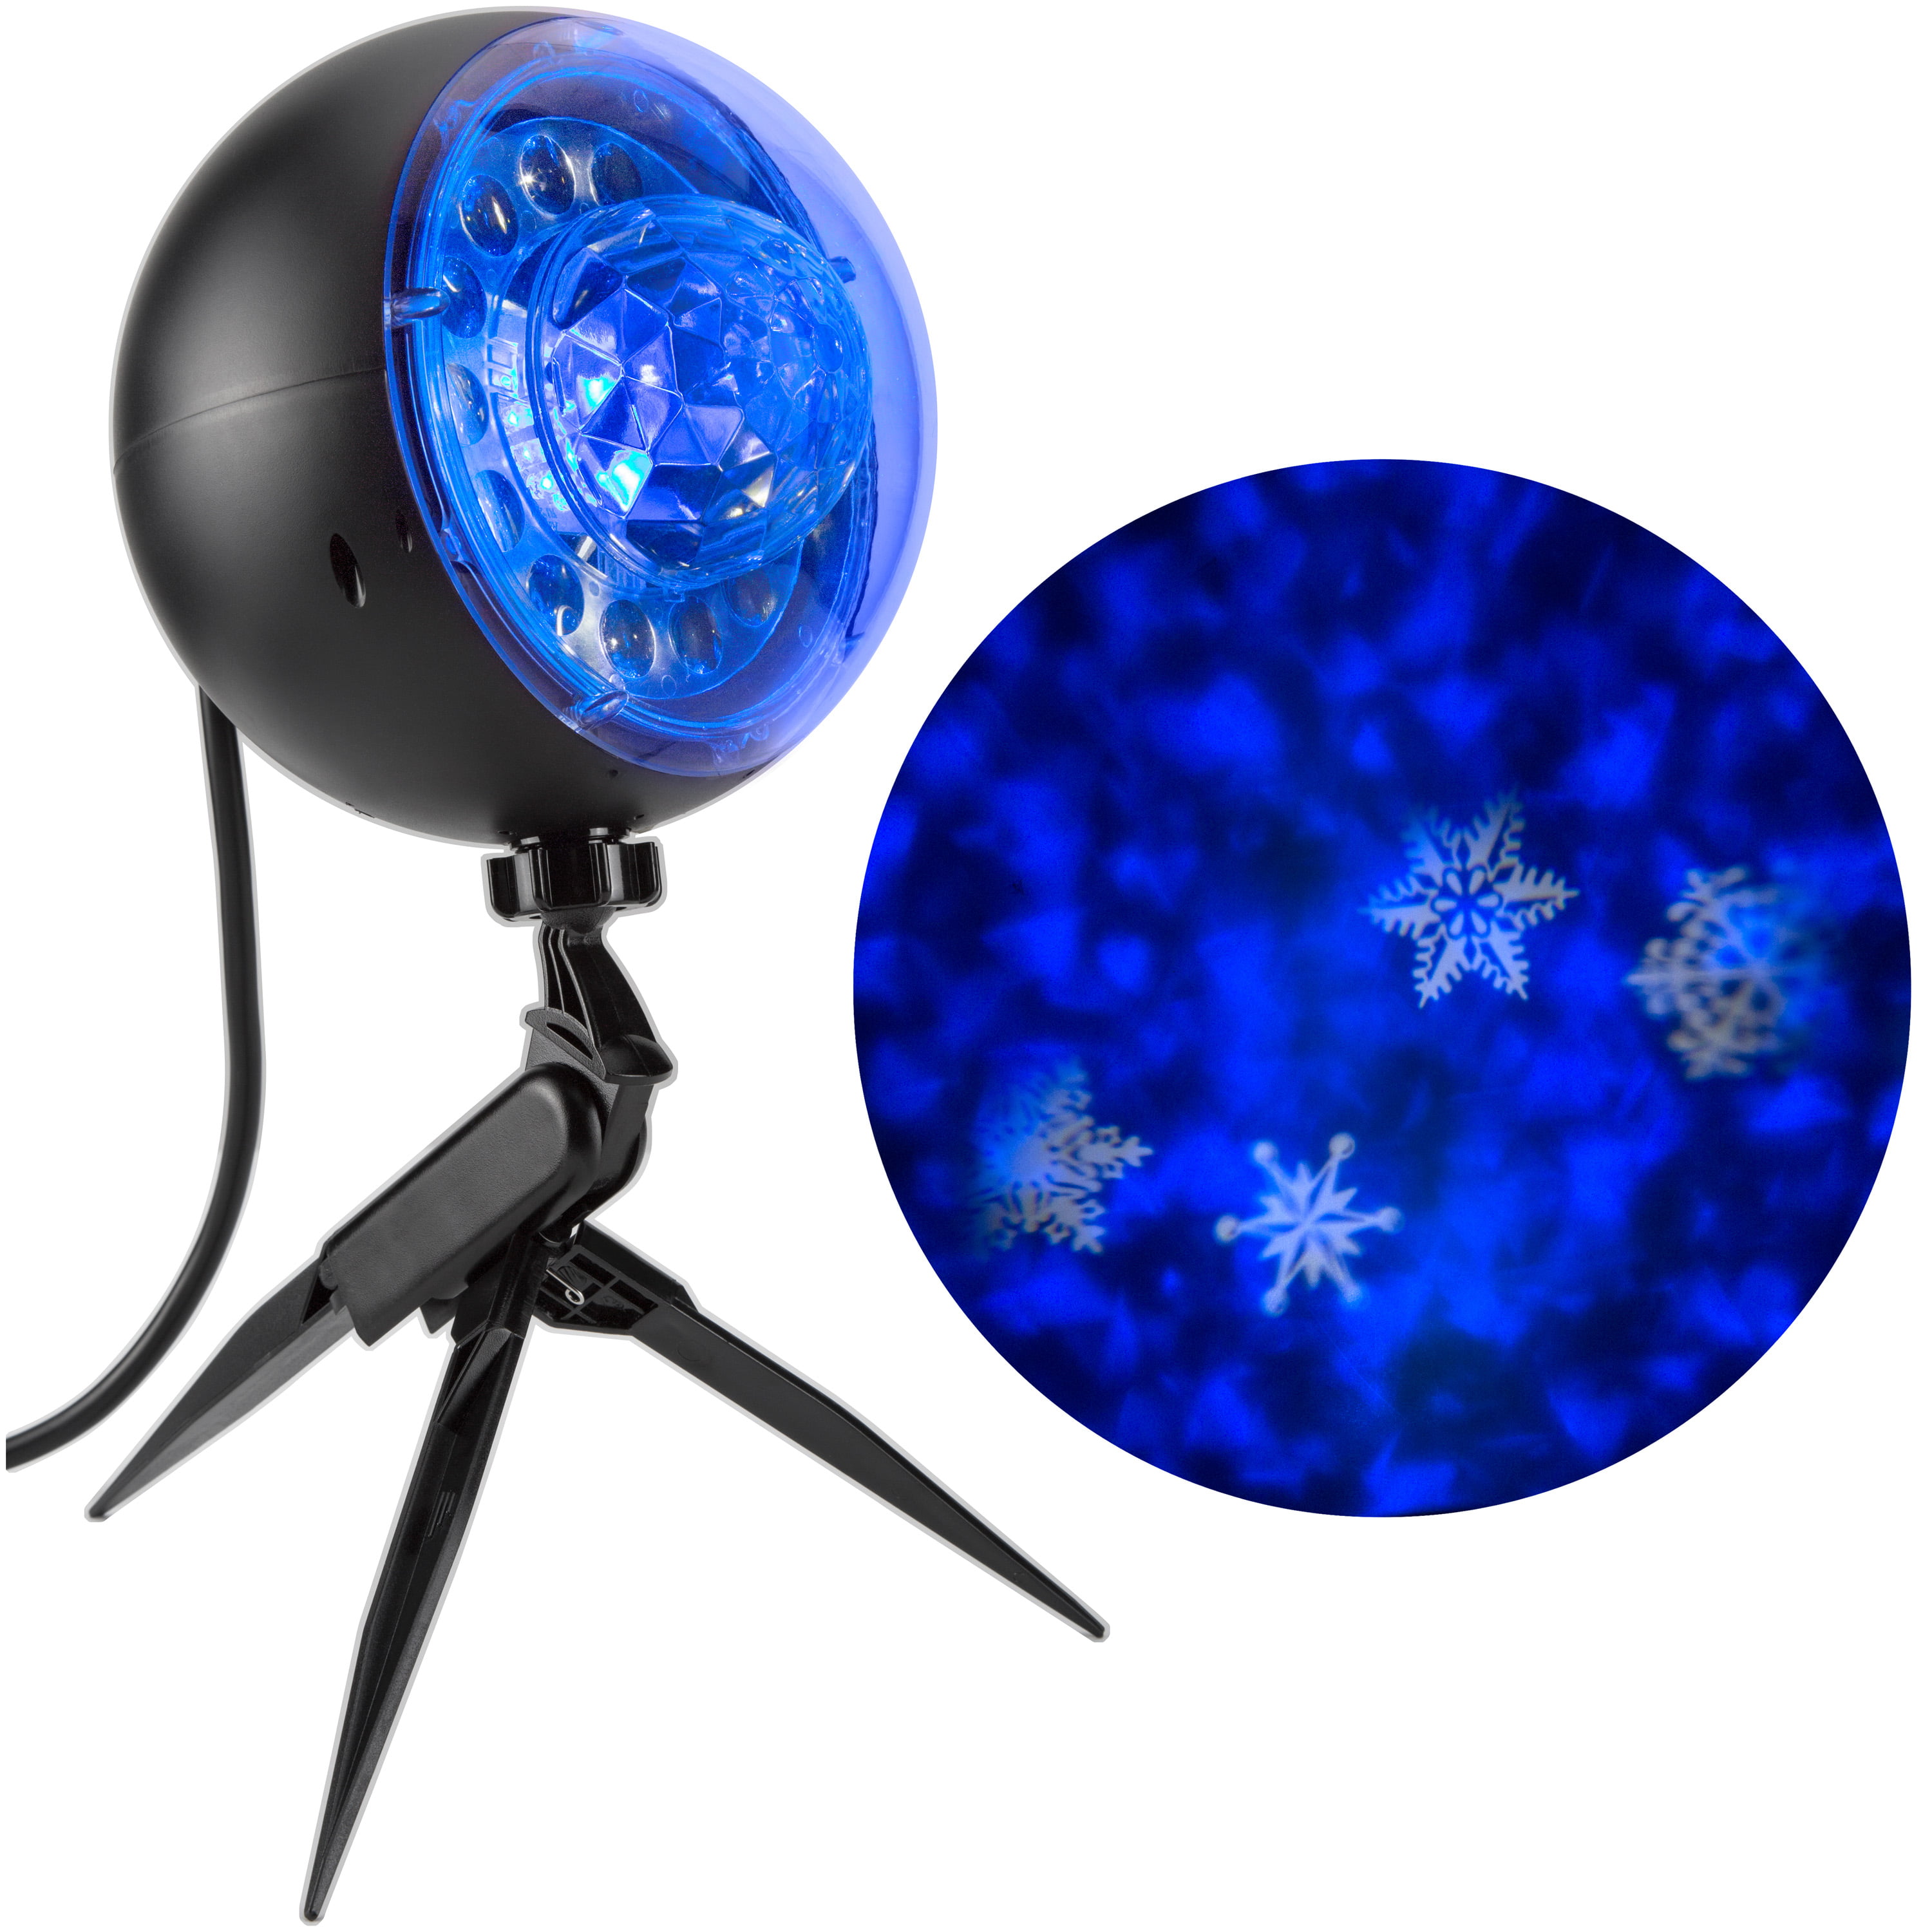 New LightShow LED Projection Plus-Whirl-a-Motion and Static-Witch with Moon